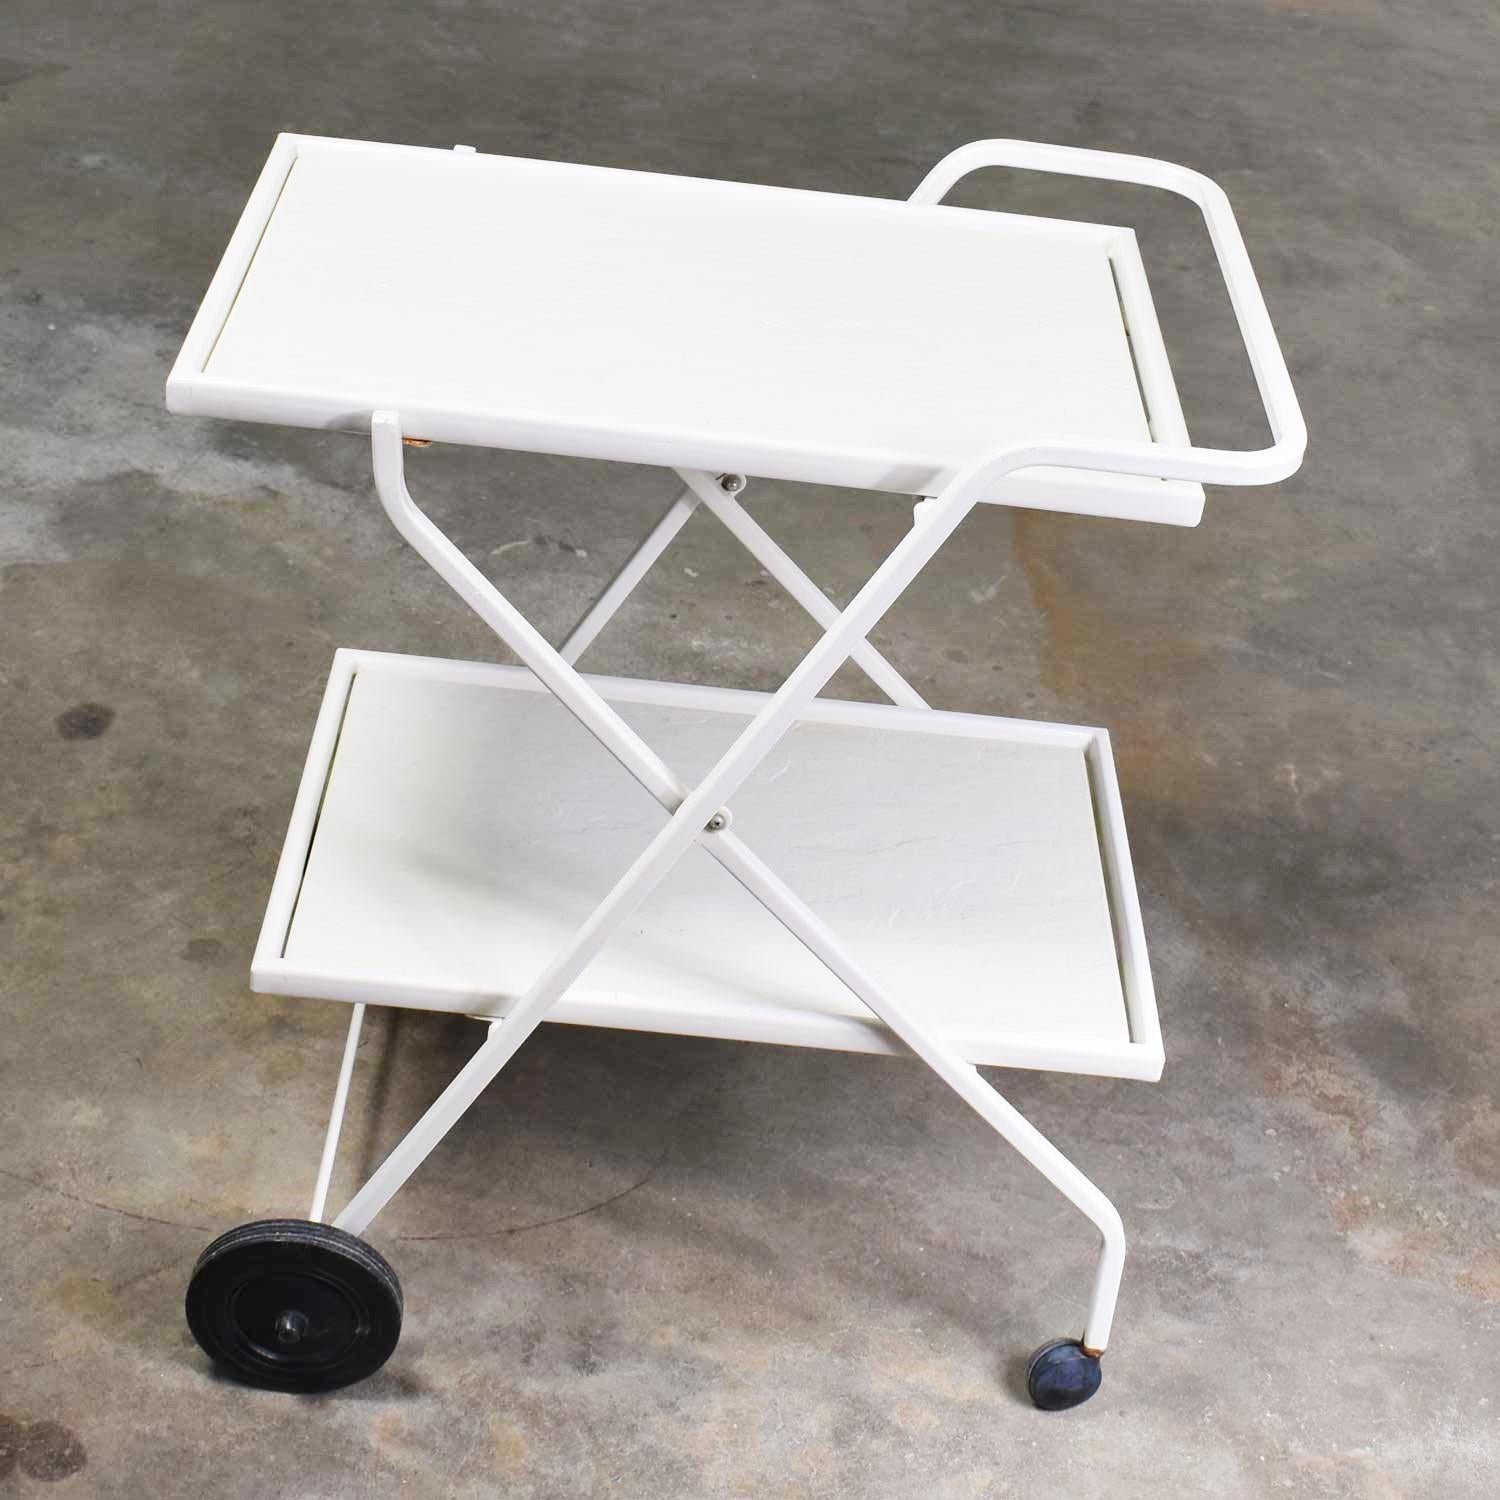 Handsome Mid-Century Modern patio white fiberglass and enameled steel tube two-tiered tea cart, bar cart, or drink cart by Samsonite. It is in fabulous vintage condition with no outstanding flaws we have detected. Please see photos, circa